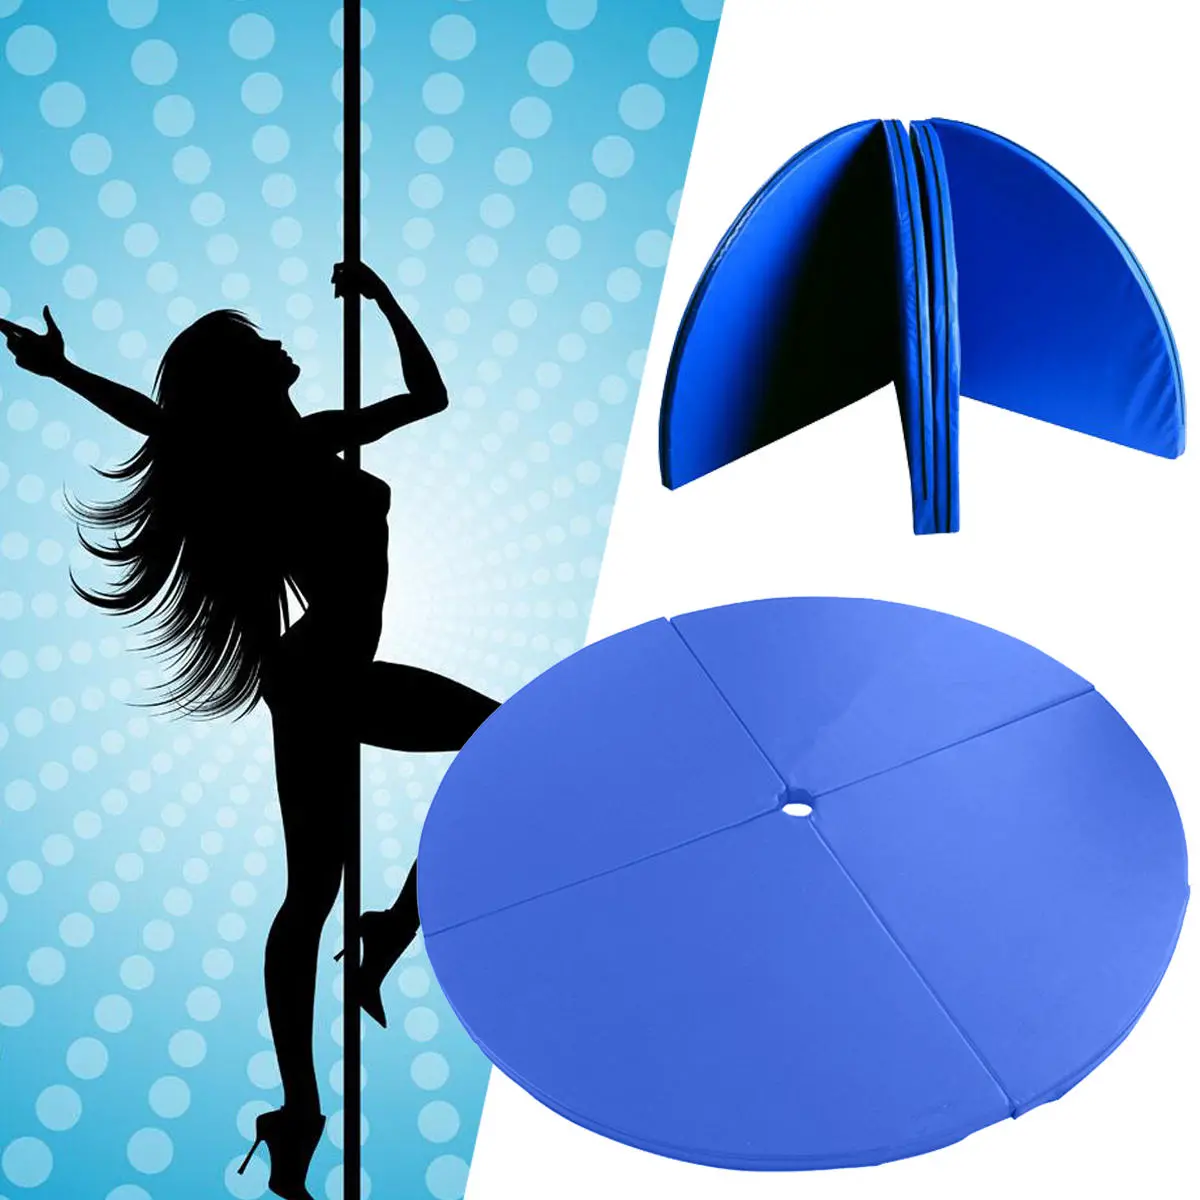 47x3 9inch 4 Folding Pole Dance Safety Mat Gym Exercise Fitness